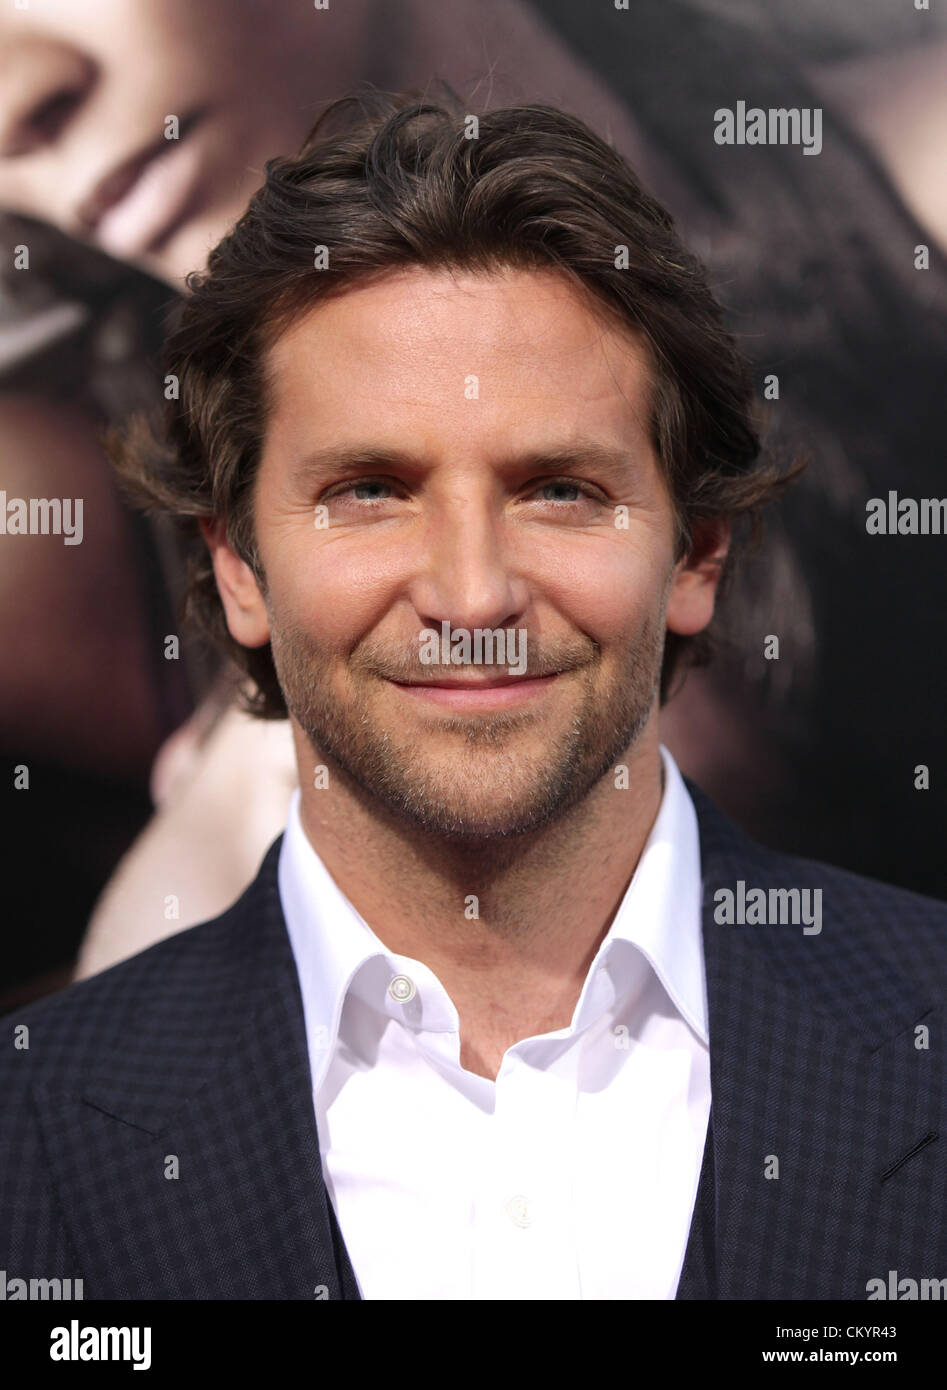 Sept. 4, 2012 - Hollywood, California, U.S. - Bradley Cooper arrives for the premiere of the film 'The Words' at the Arclight theater. (Credit Image: © Lisa O'Connor/ZUMAPRESS.com) Stock Photo